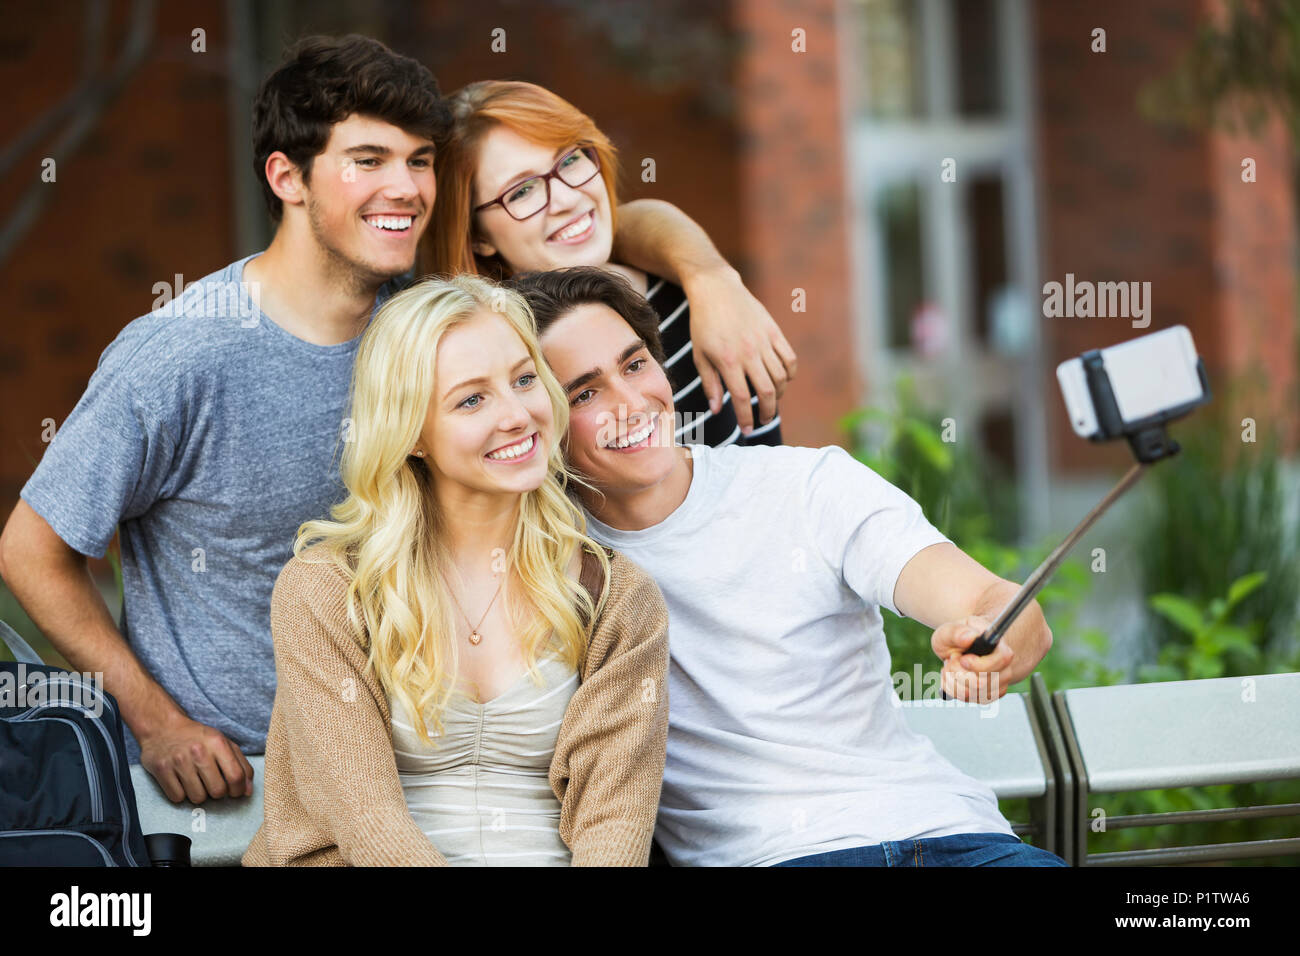 A group of four friends sitting on a bench taking a self-portrait with a smart phone using a selfie stick on a university campus Stock Photo